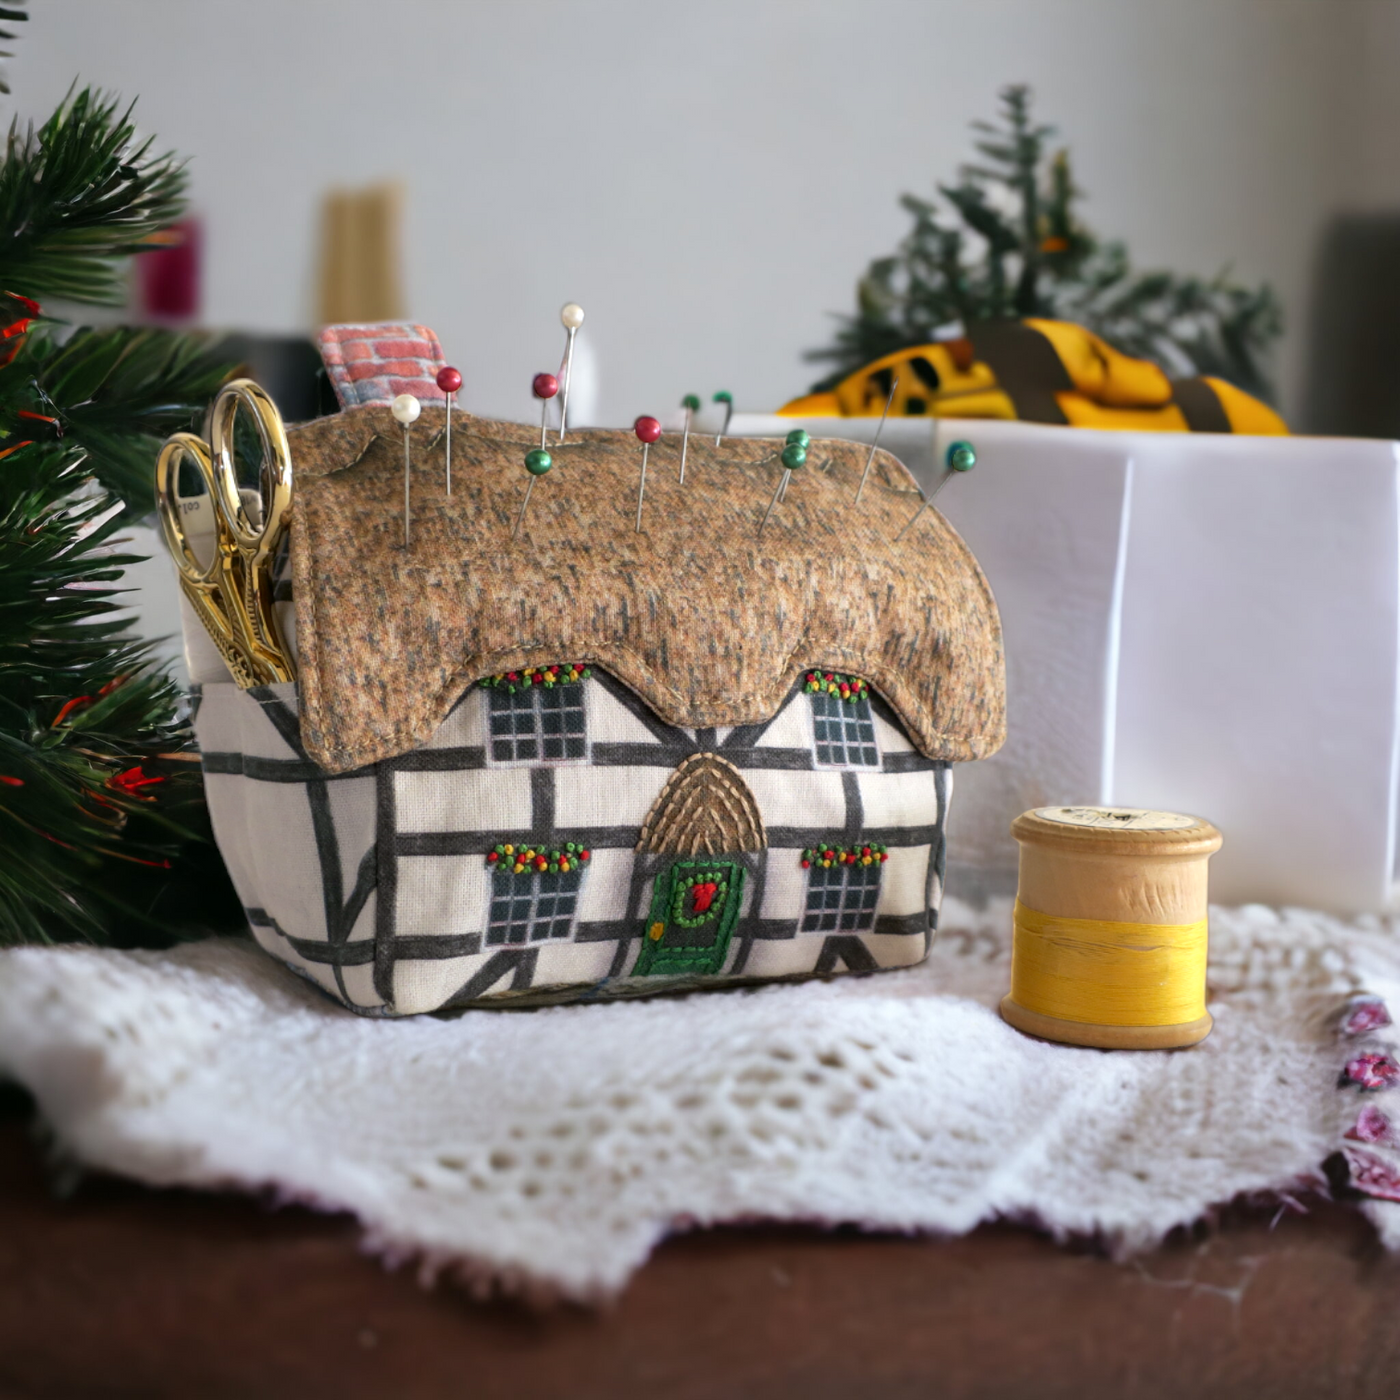 The Christmas Cottage Sewing Kit